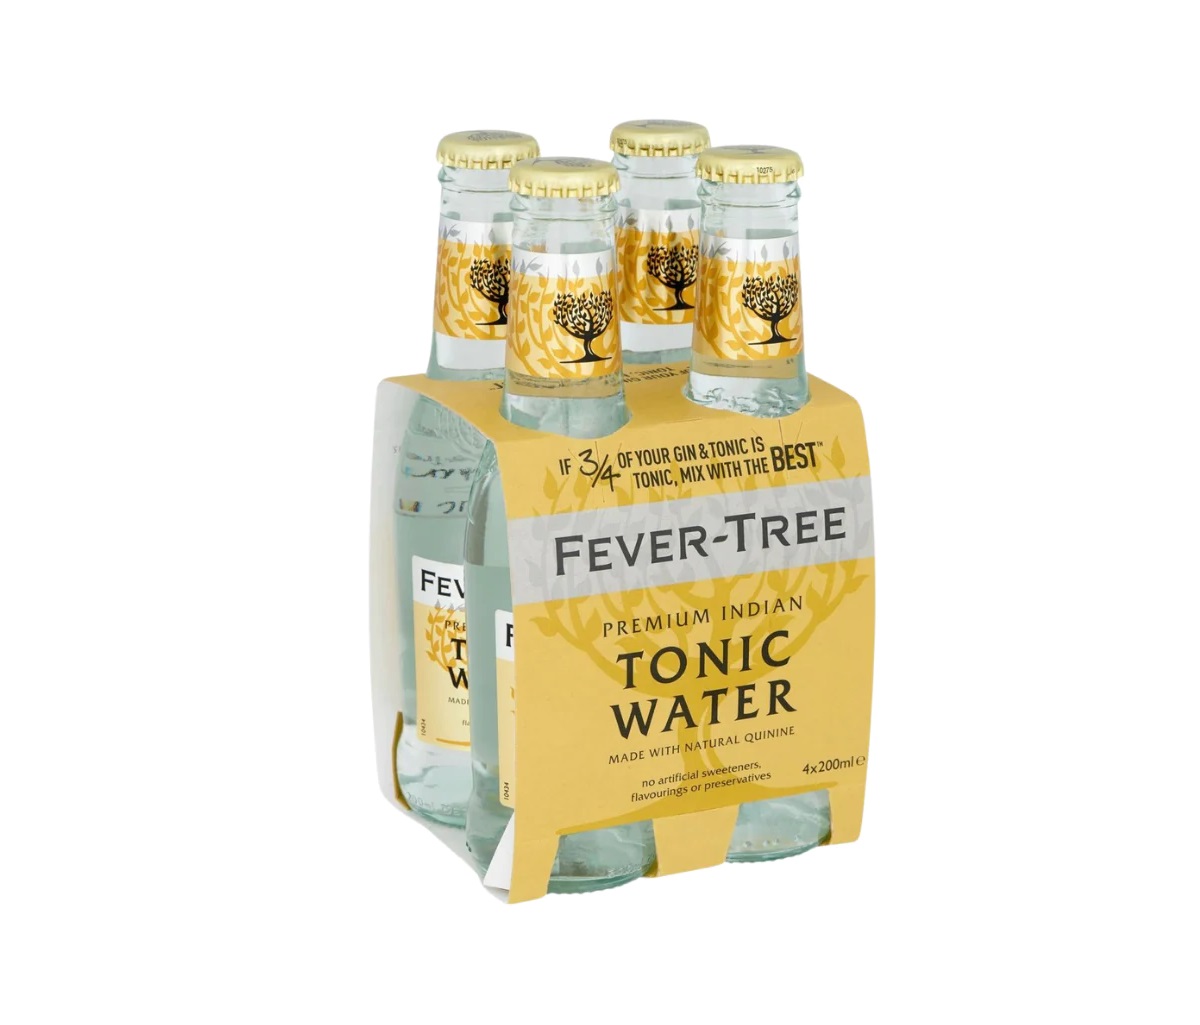 19-fever-tree-tonic-water-nutrition-facts